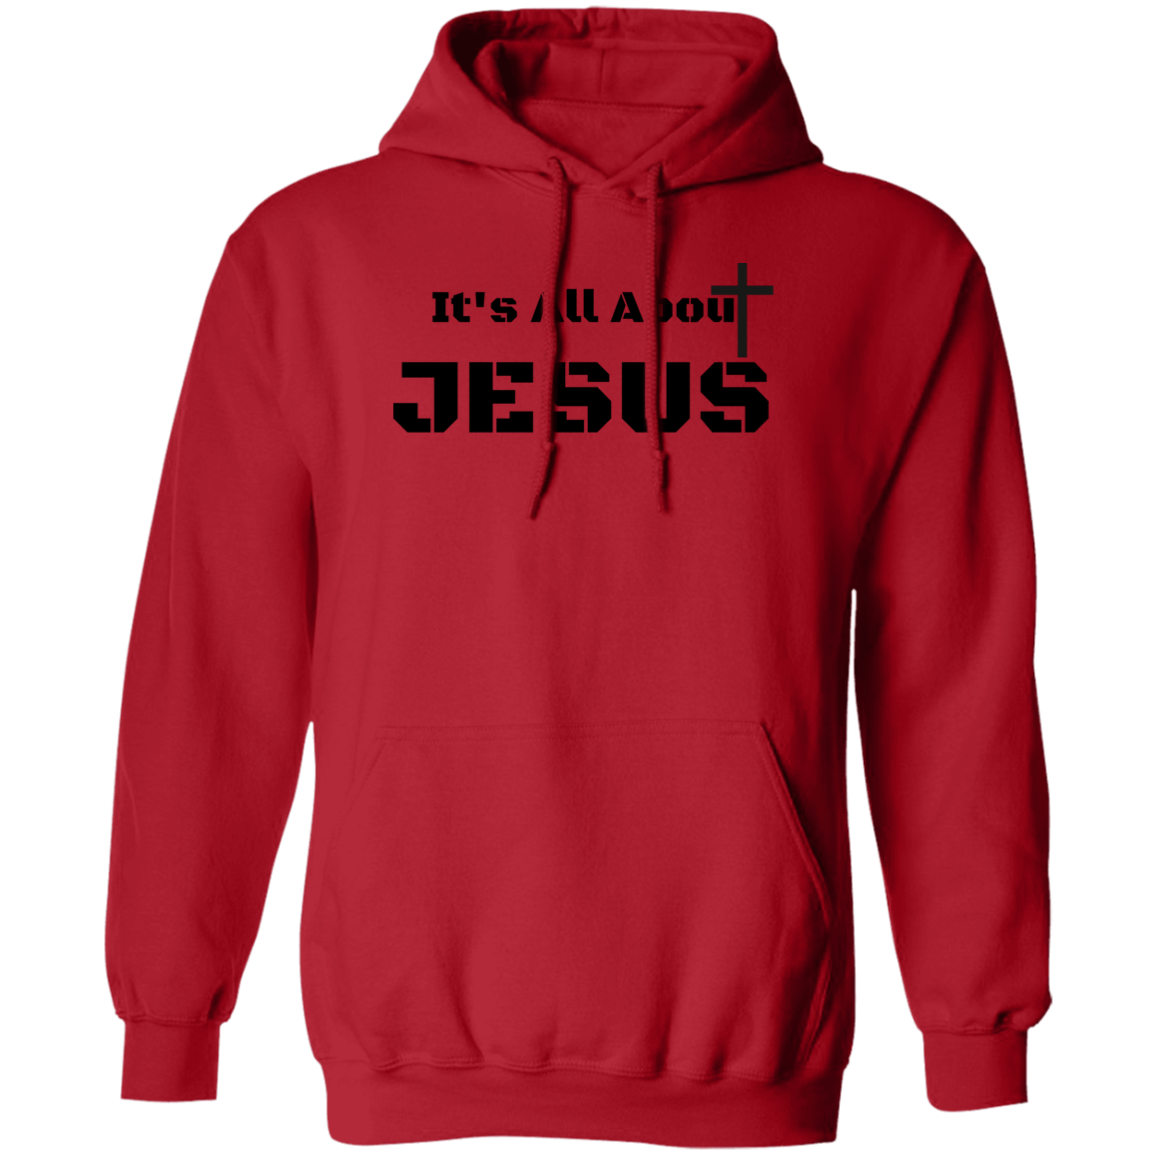 It's All About Jesus Pullover Hoodie Faith Based Apparel